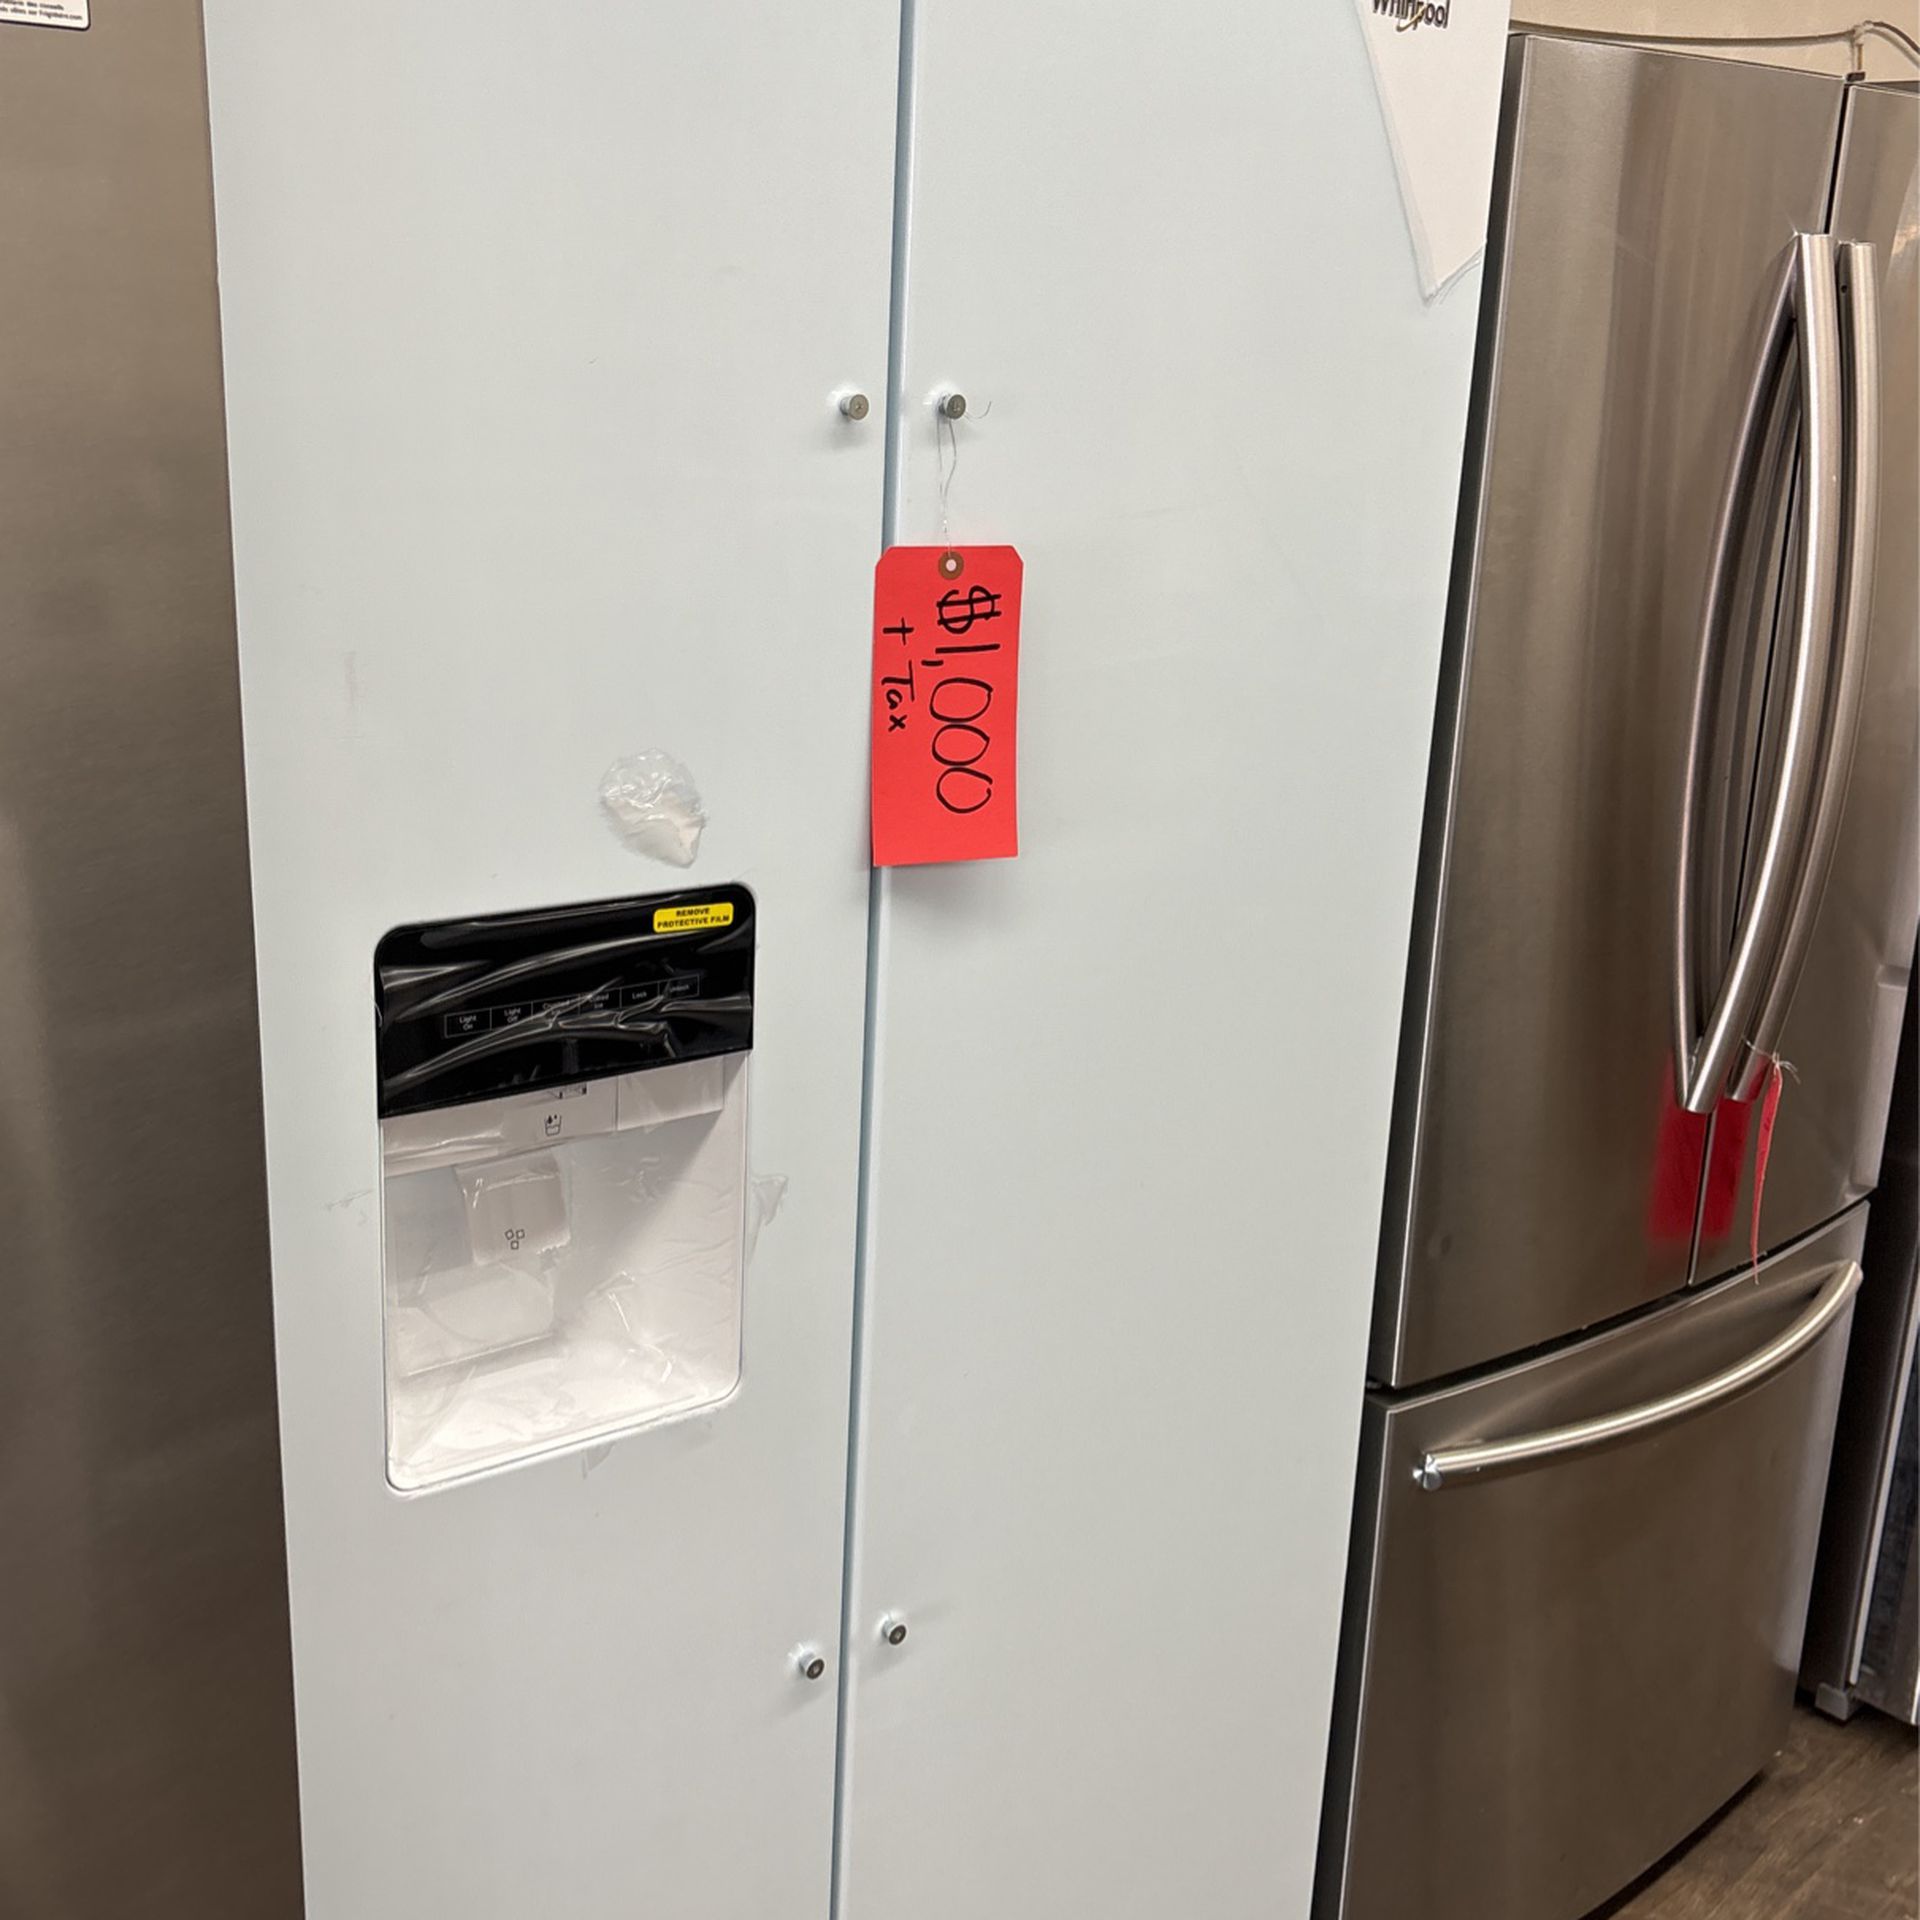 WHIRLPOOL SIDE BY SIDE WHITE REFRIGERATOR 